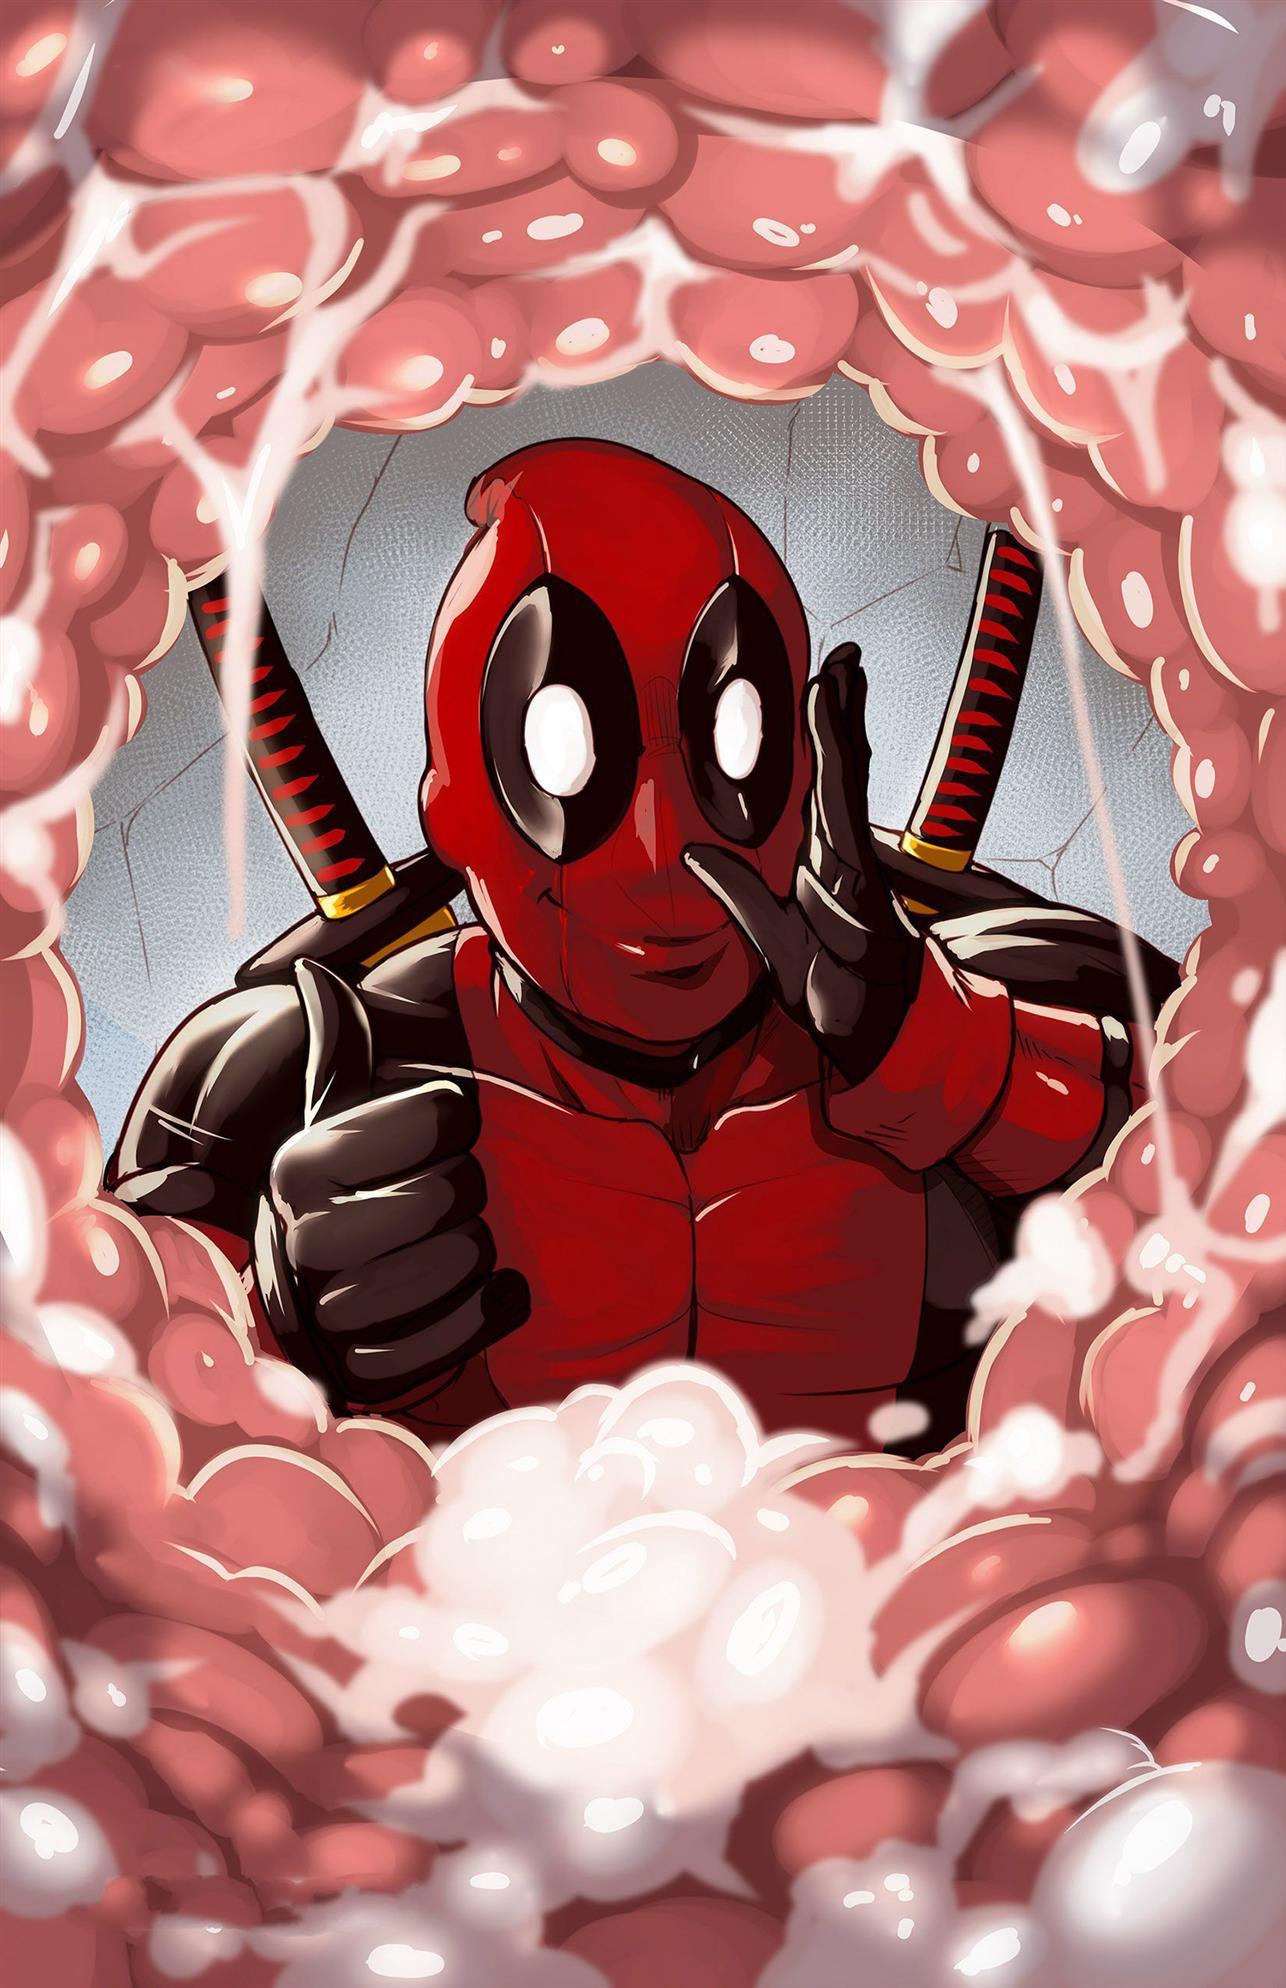 Deadpool Thinking With Portals (Deadpool) [Tracy Scops]